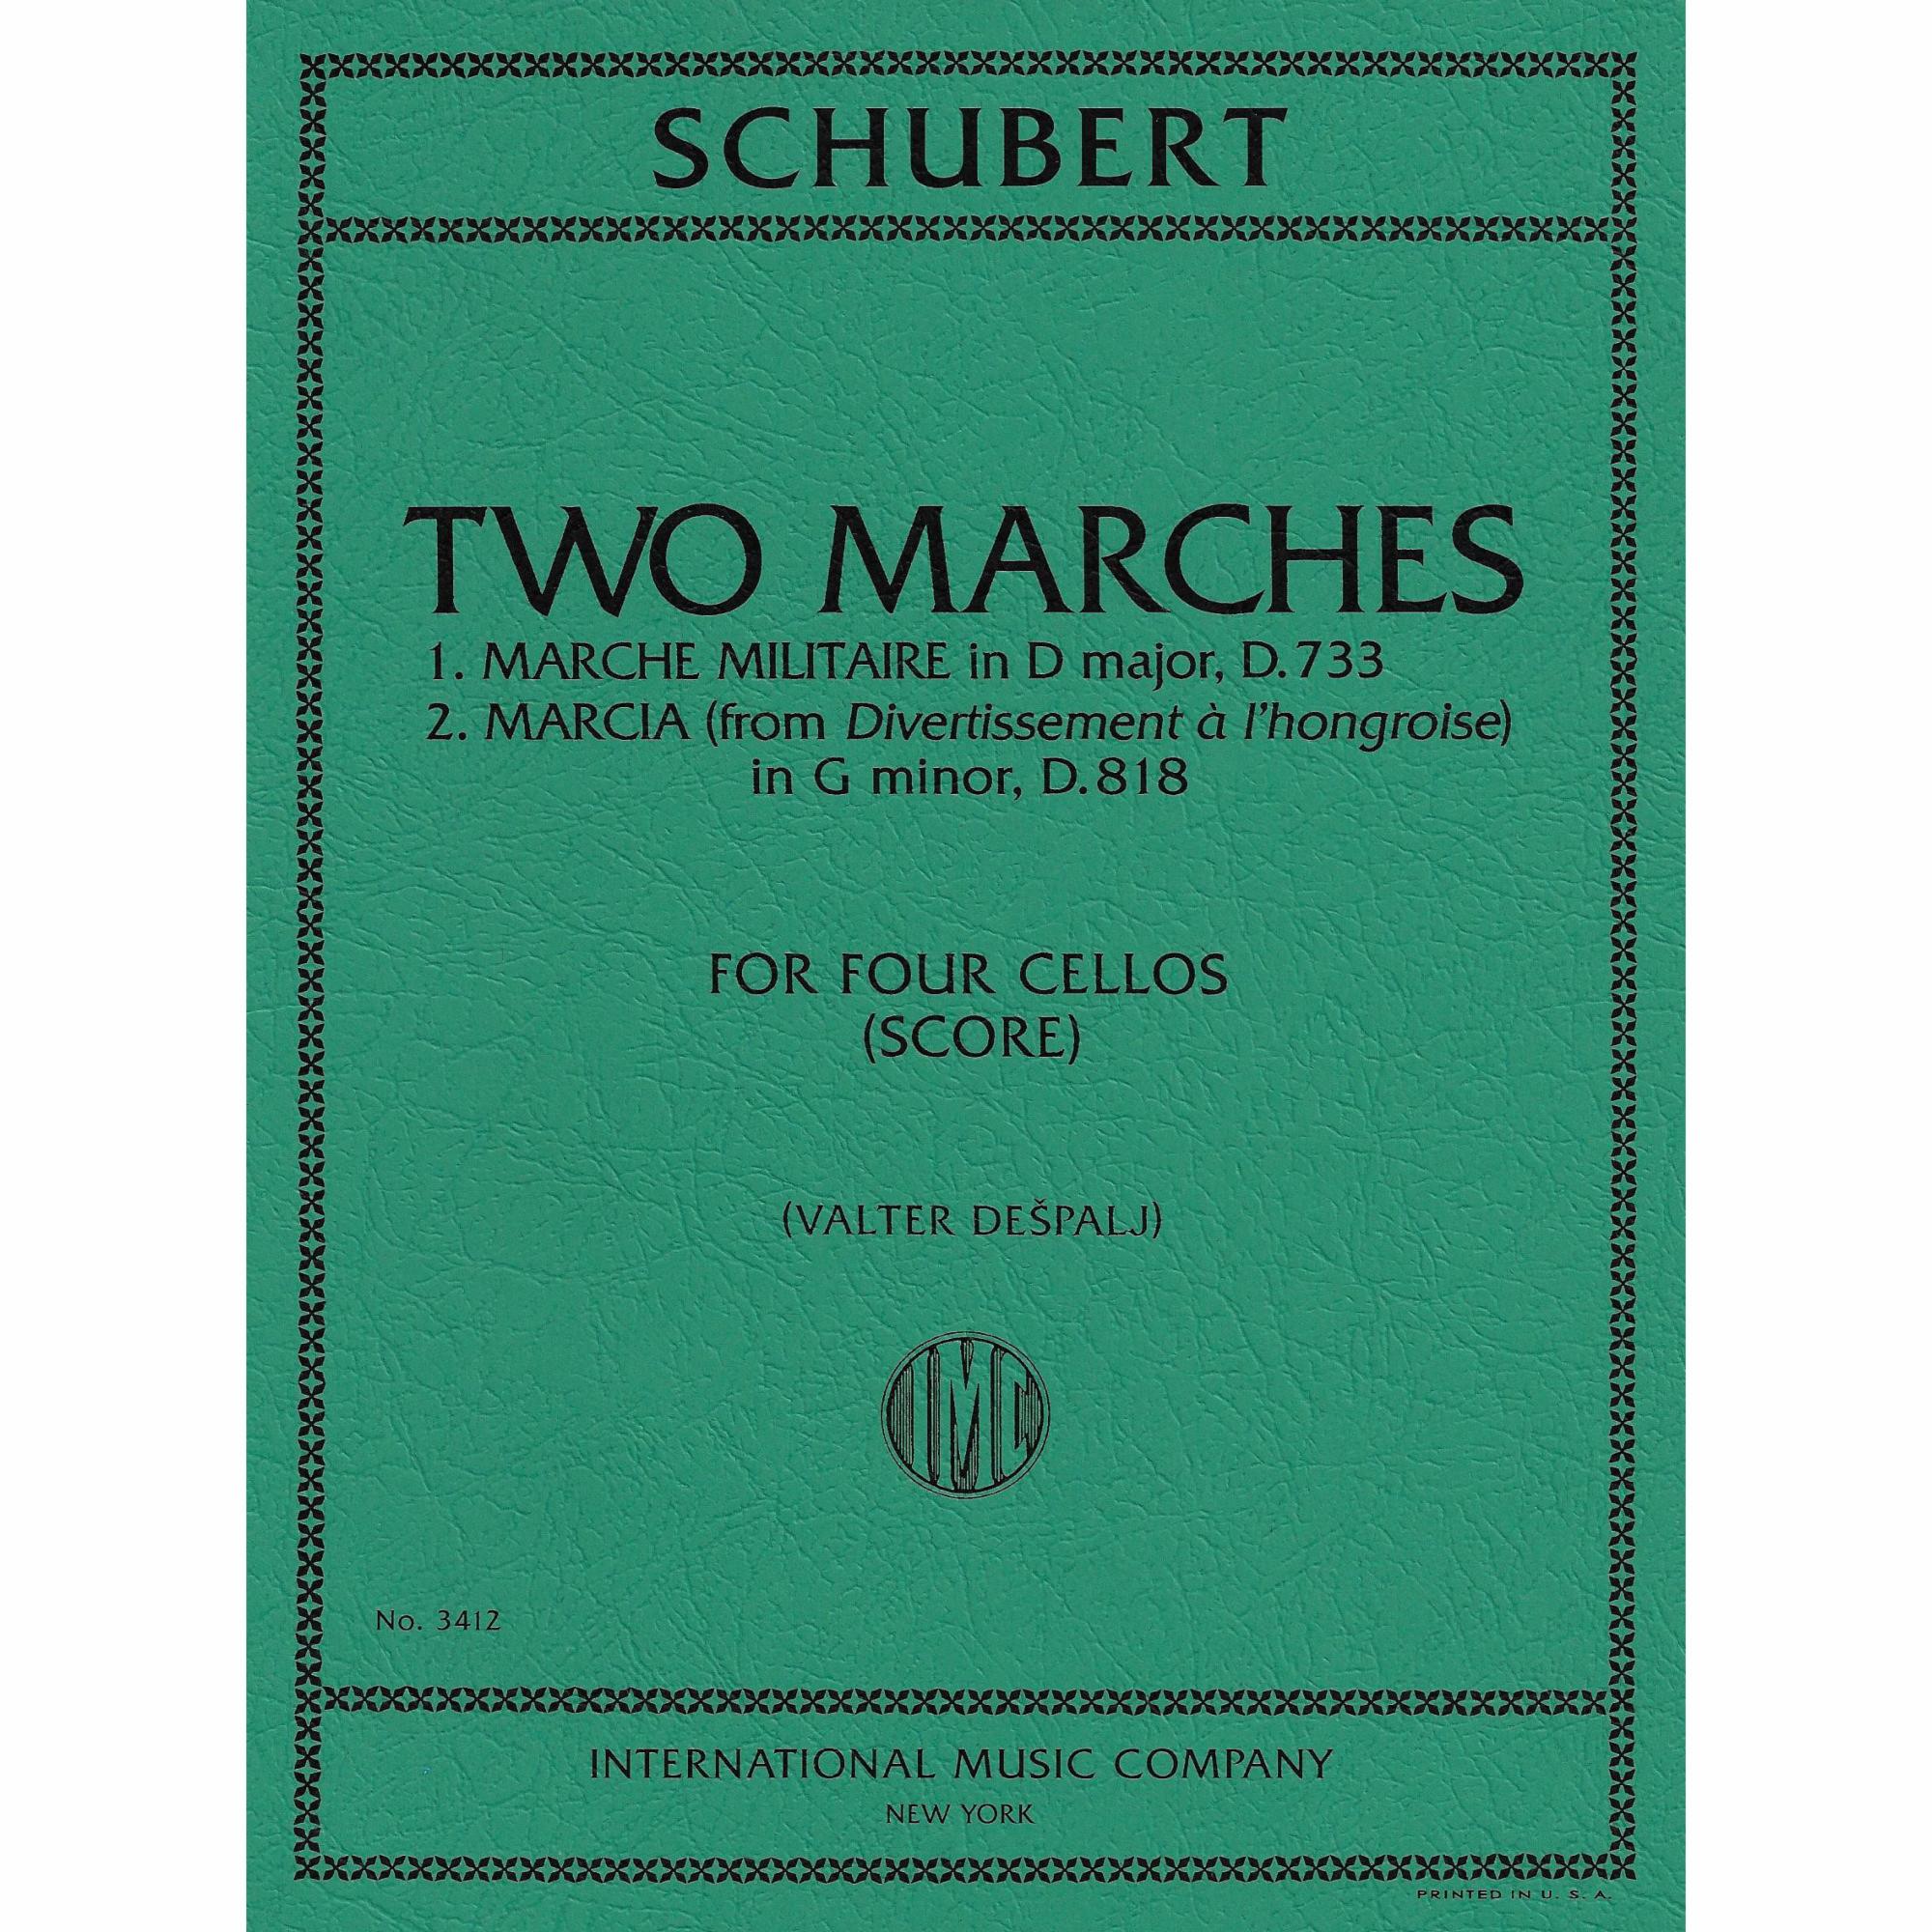 Schubert -- Two Marches for Four Cellos